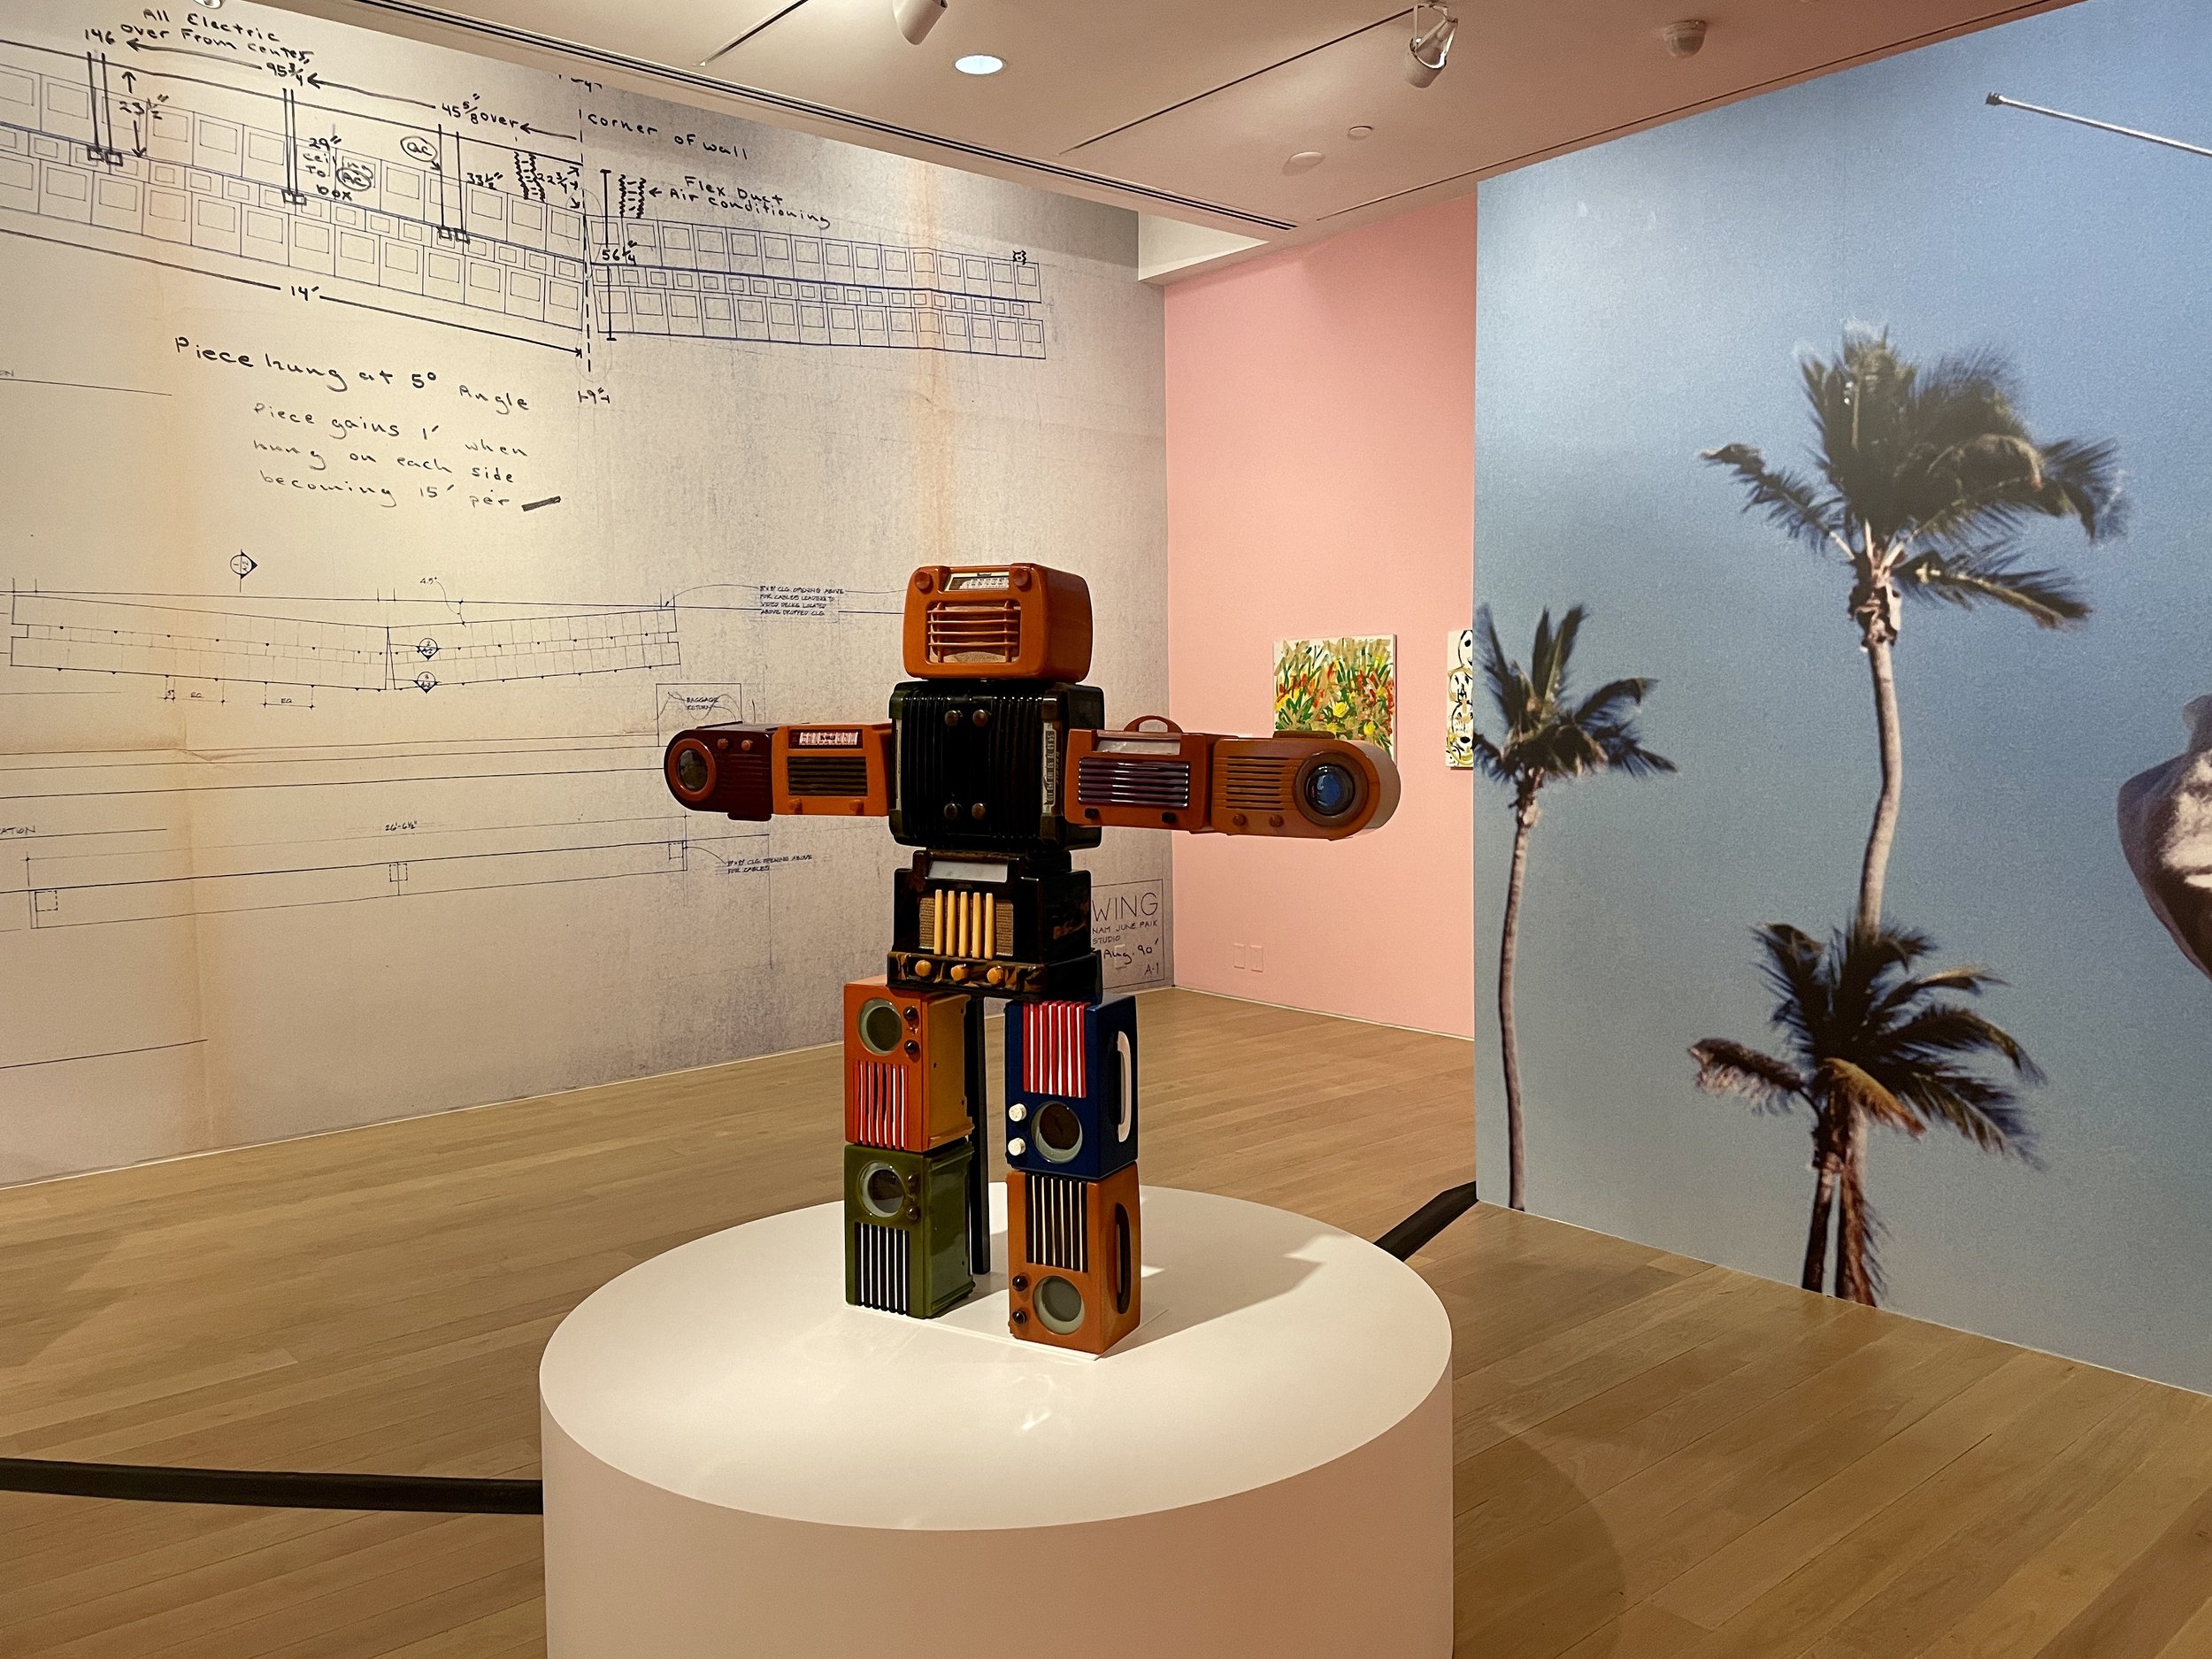  Nam June Paik,  Bakelite Robot , 2002, single-channel video installation with five 5.6 in. LCD monitors and two 4 in. LCD monitors, electric lights and oil marker, 50 × 54 5/8 × 7 1/2 in. Courtesy of Nam June Paik Estate, with Nam June Paik, Miami I